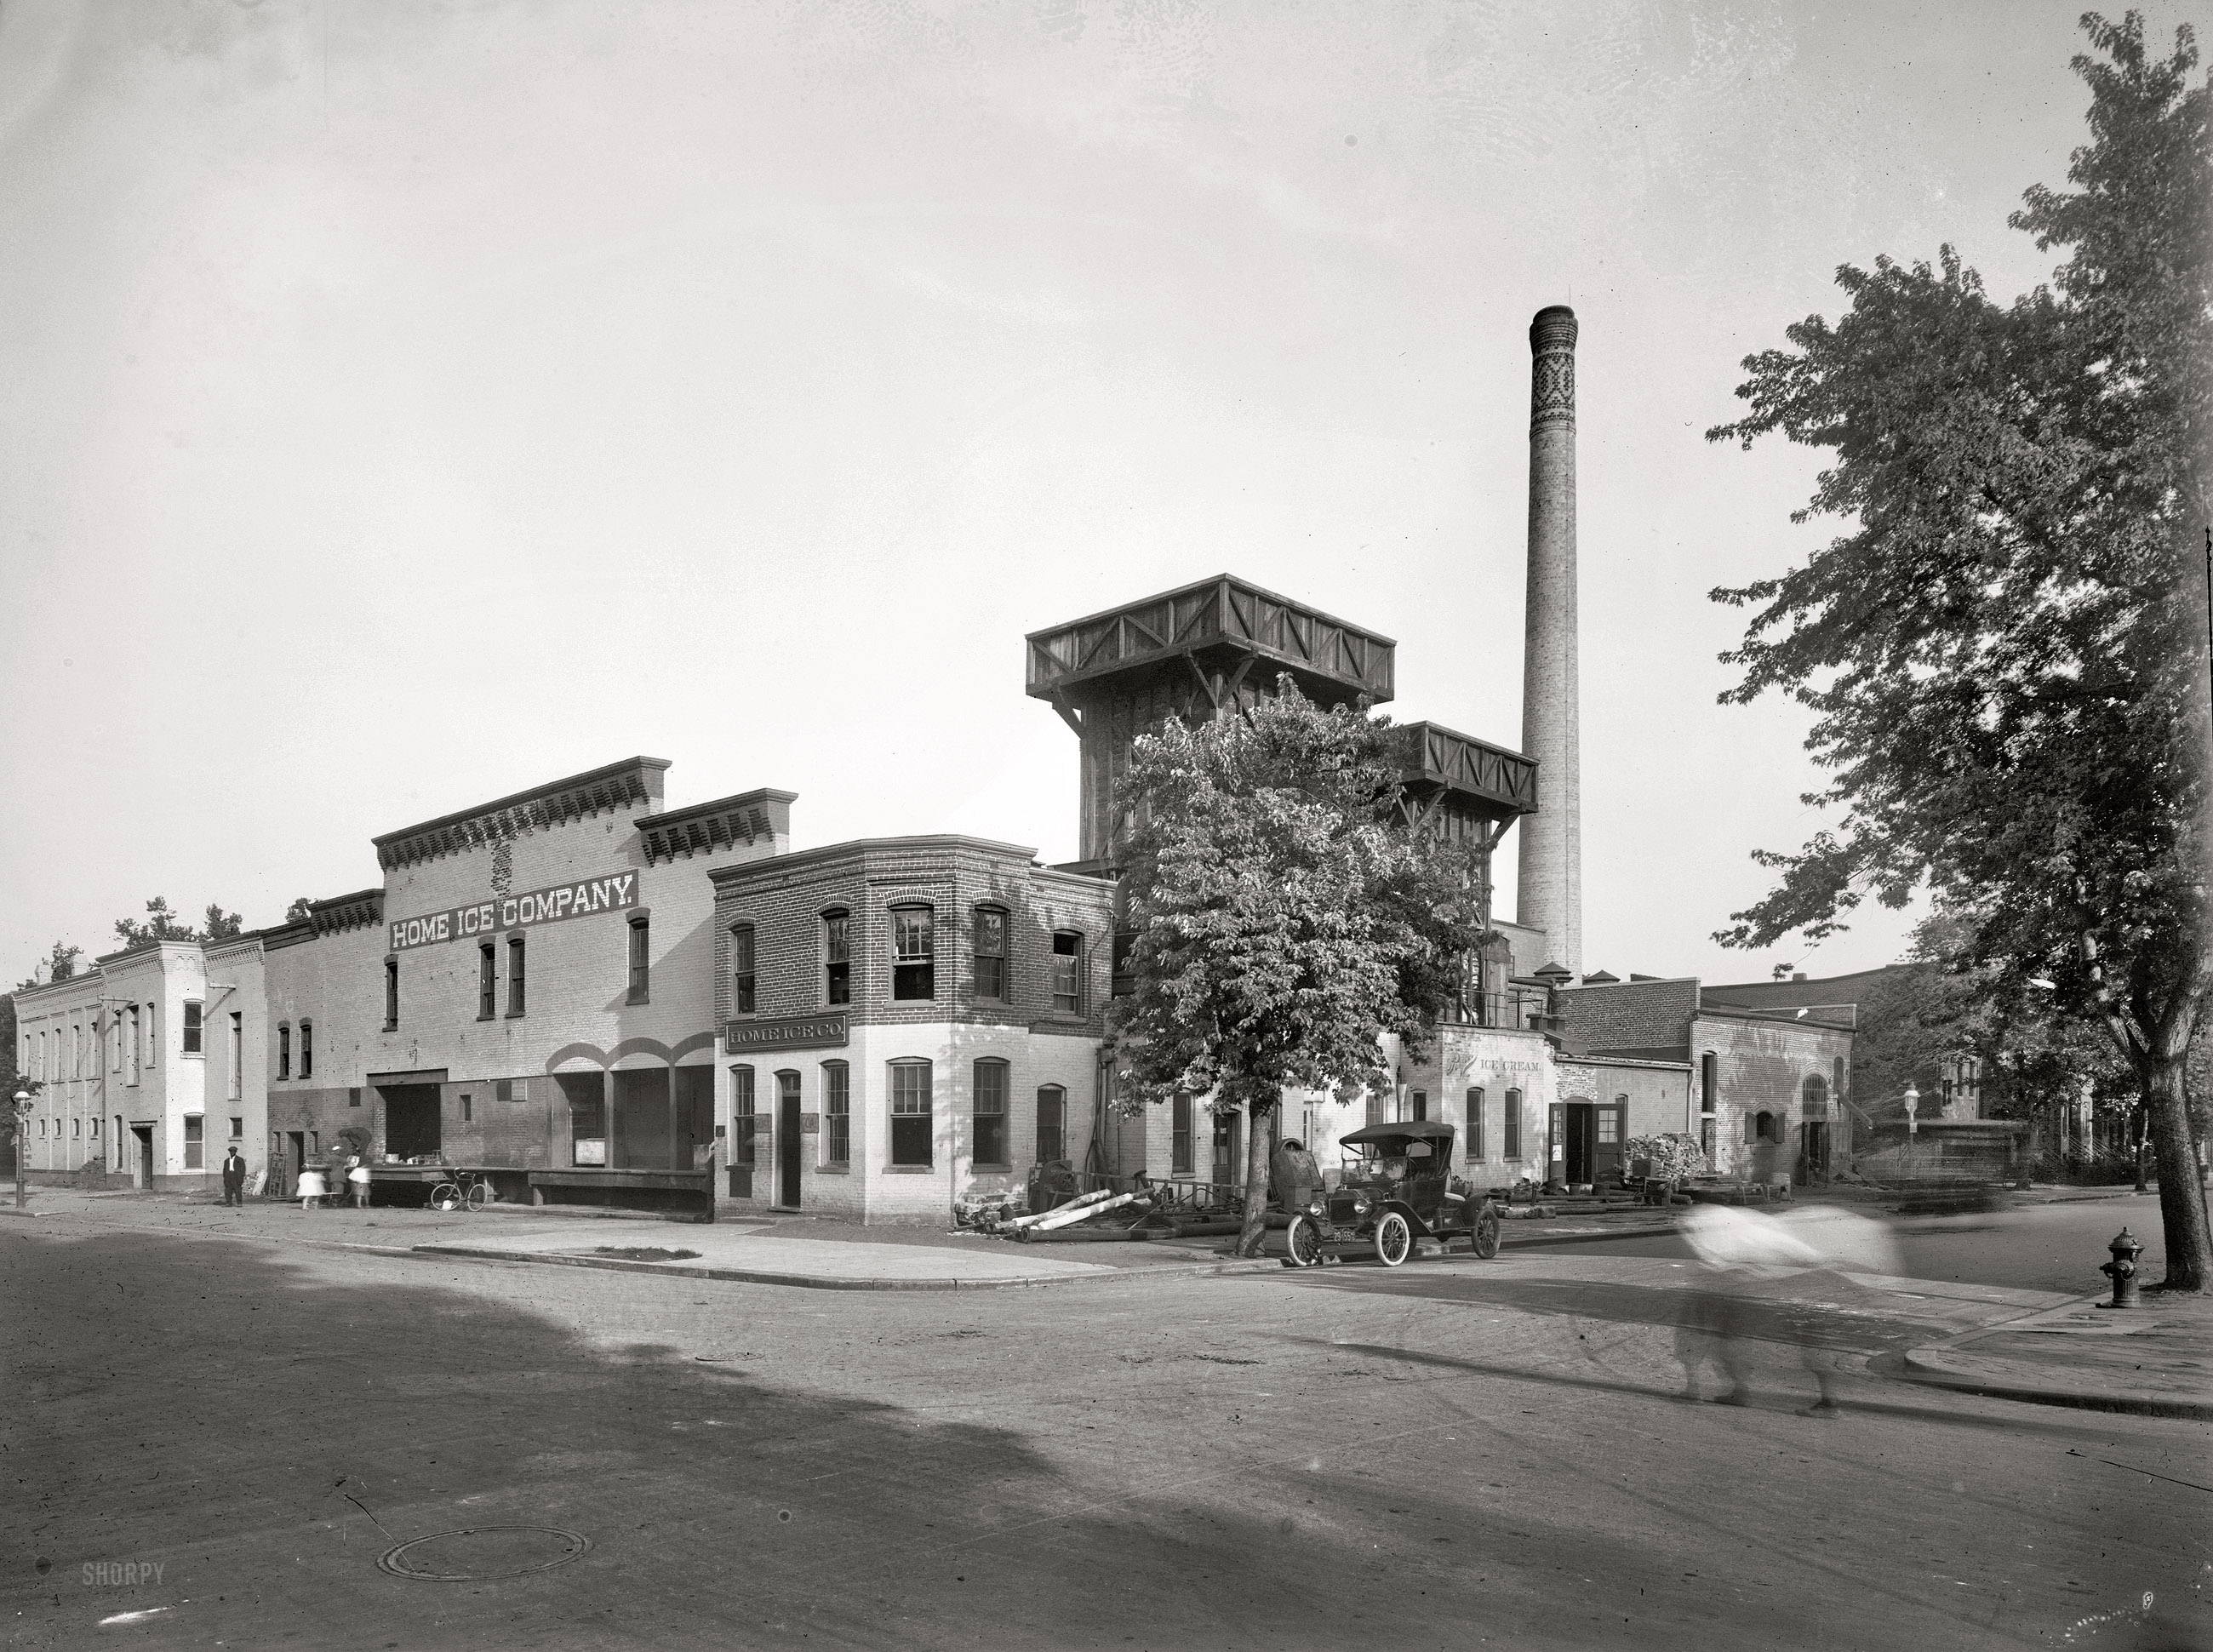 Circa 1915. "Home Ice Co." The Home Ice plant at 12th and V streets N.W. in Washington. National Photo Company Collection glass negative. View full size.